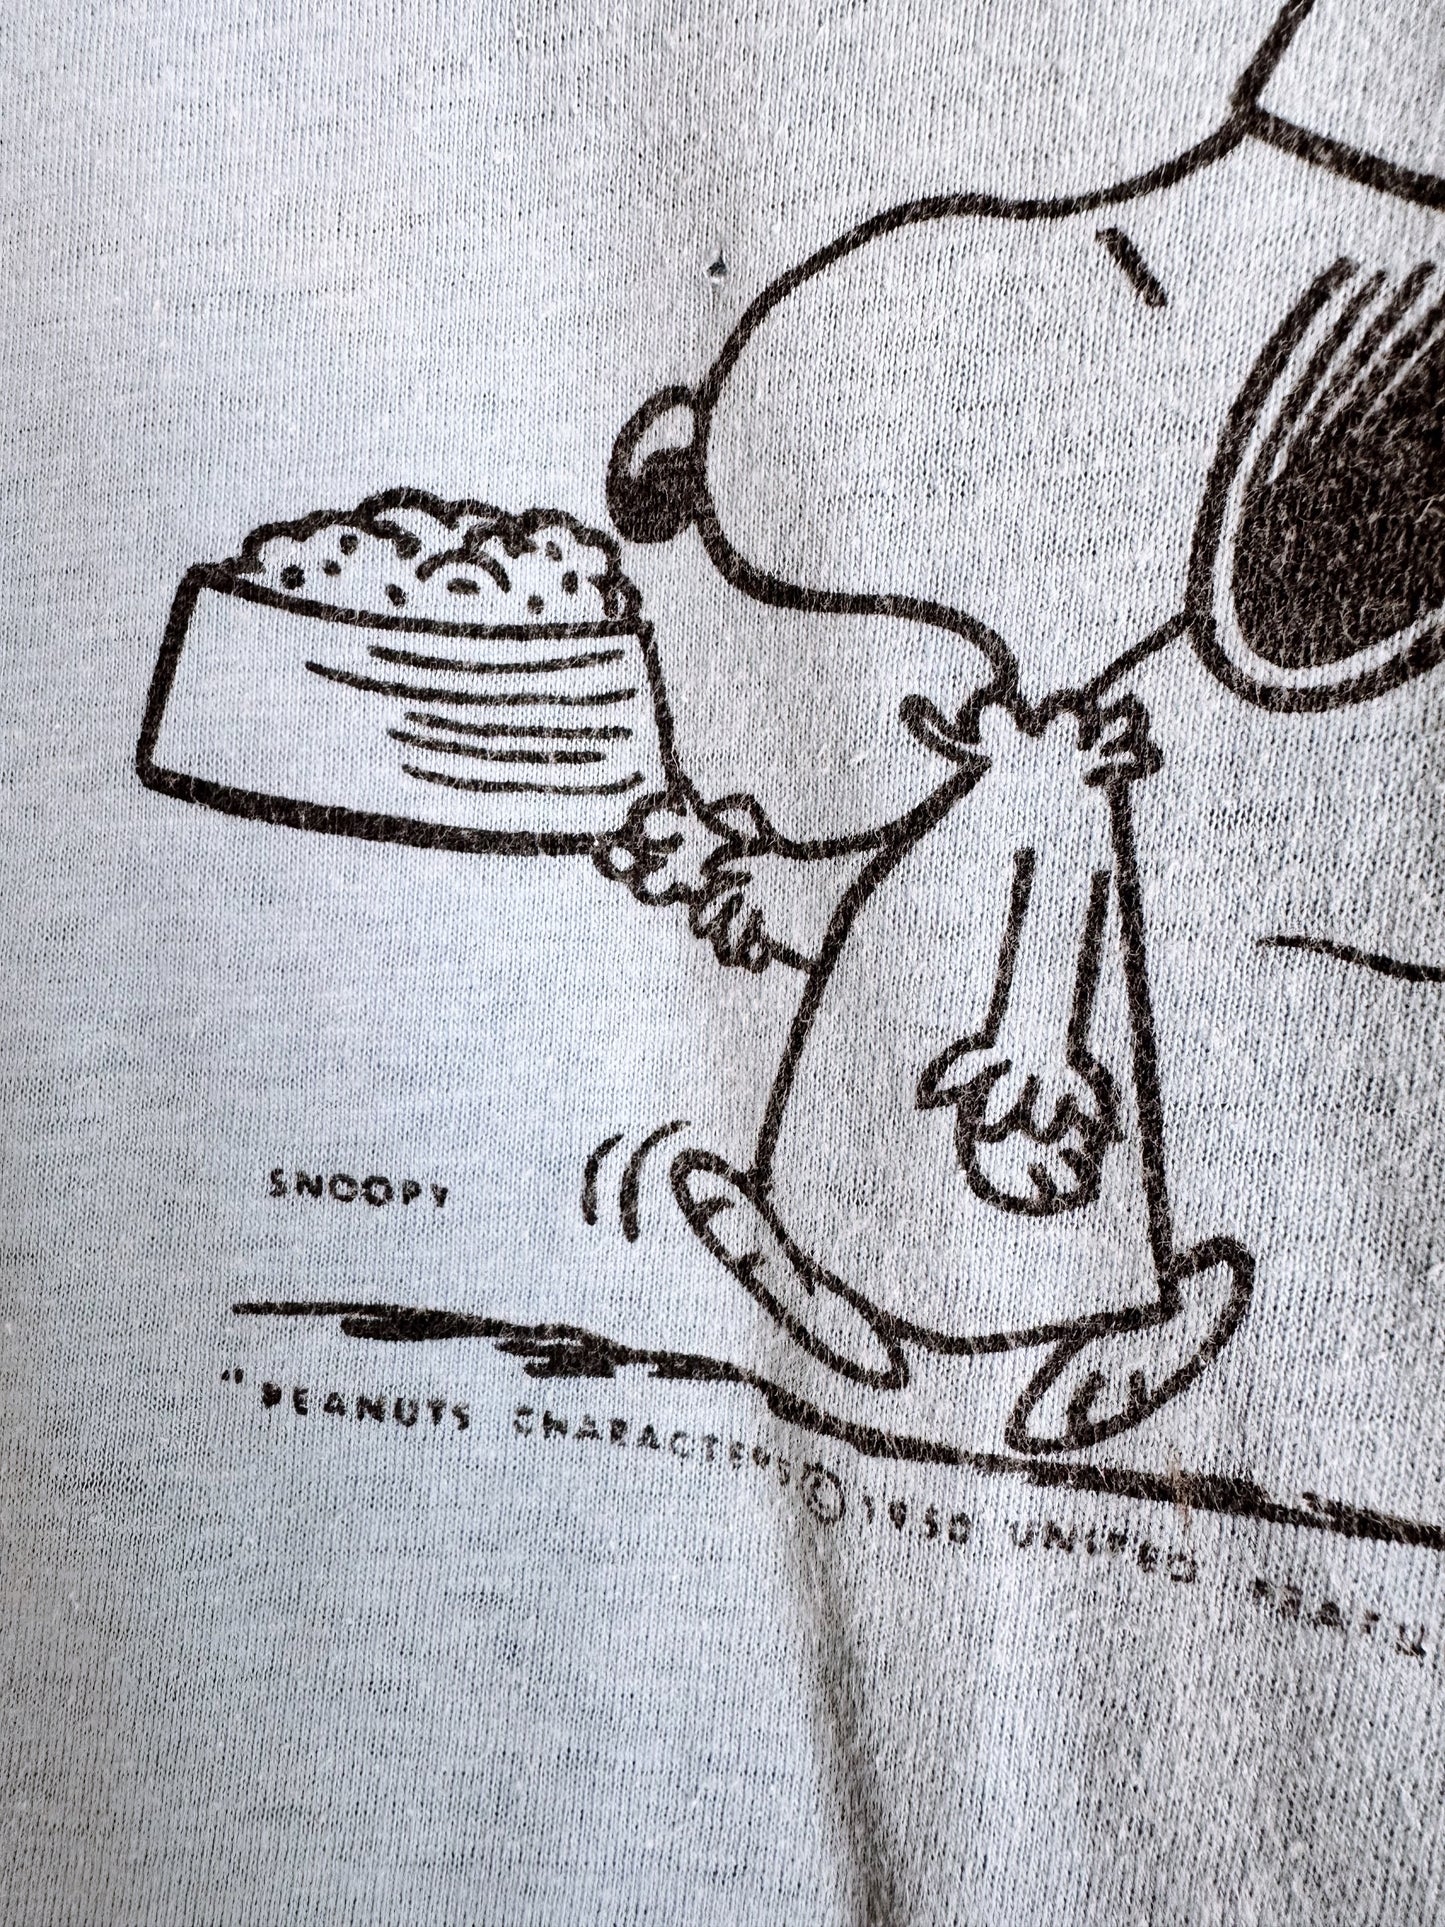 60s Snoopy Supper Time Long Sleeve Tee